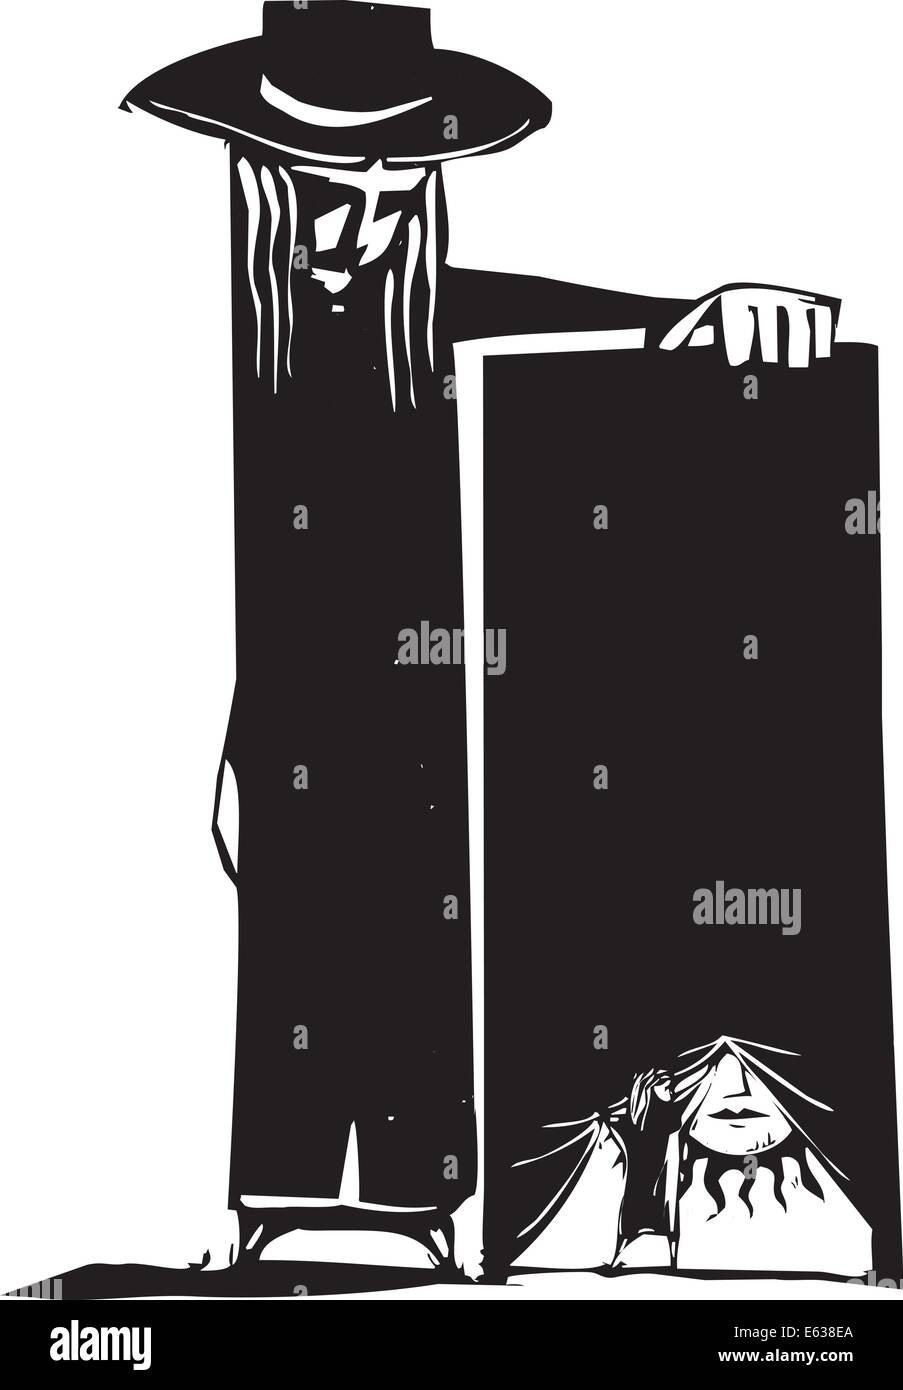 Girl lifts stage curtain while giant woman watches. Stock Vector